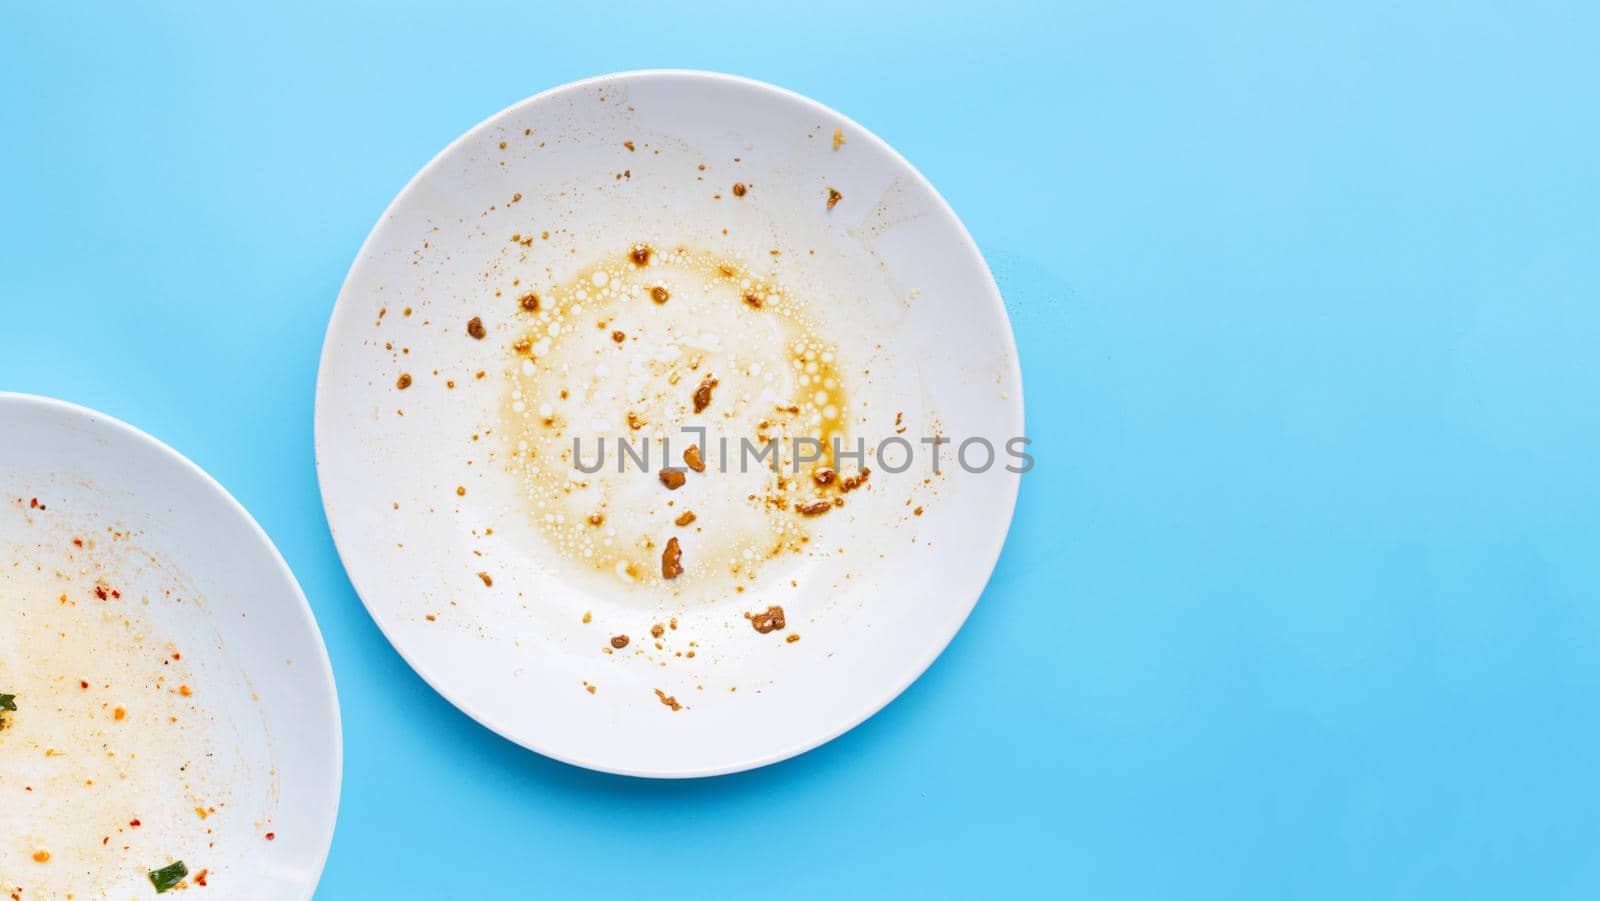 Dirty dishes on blue background.